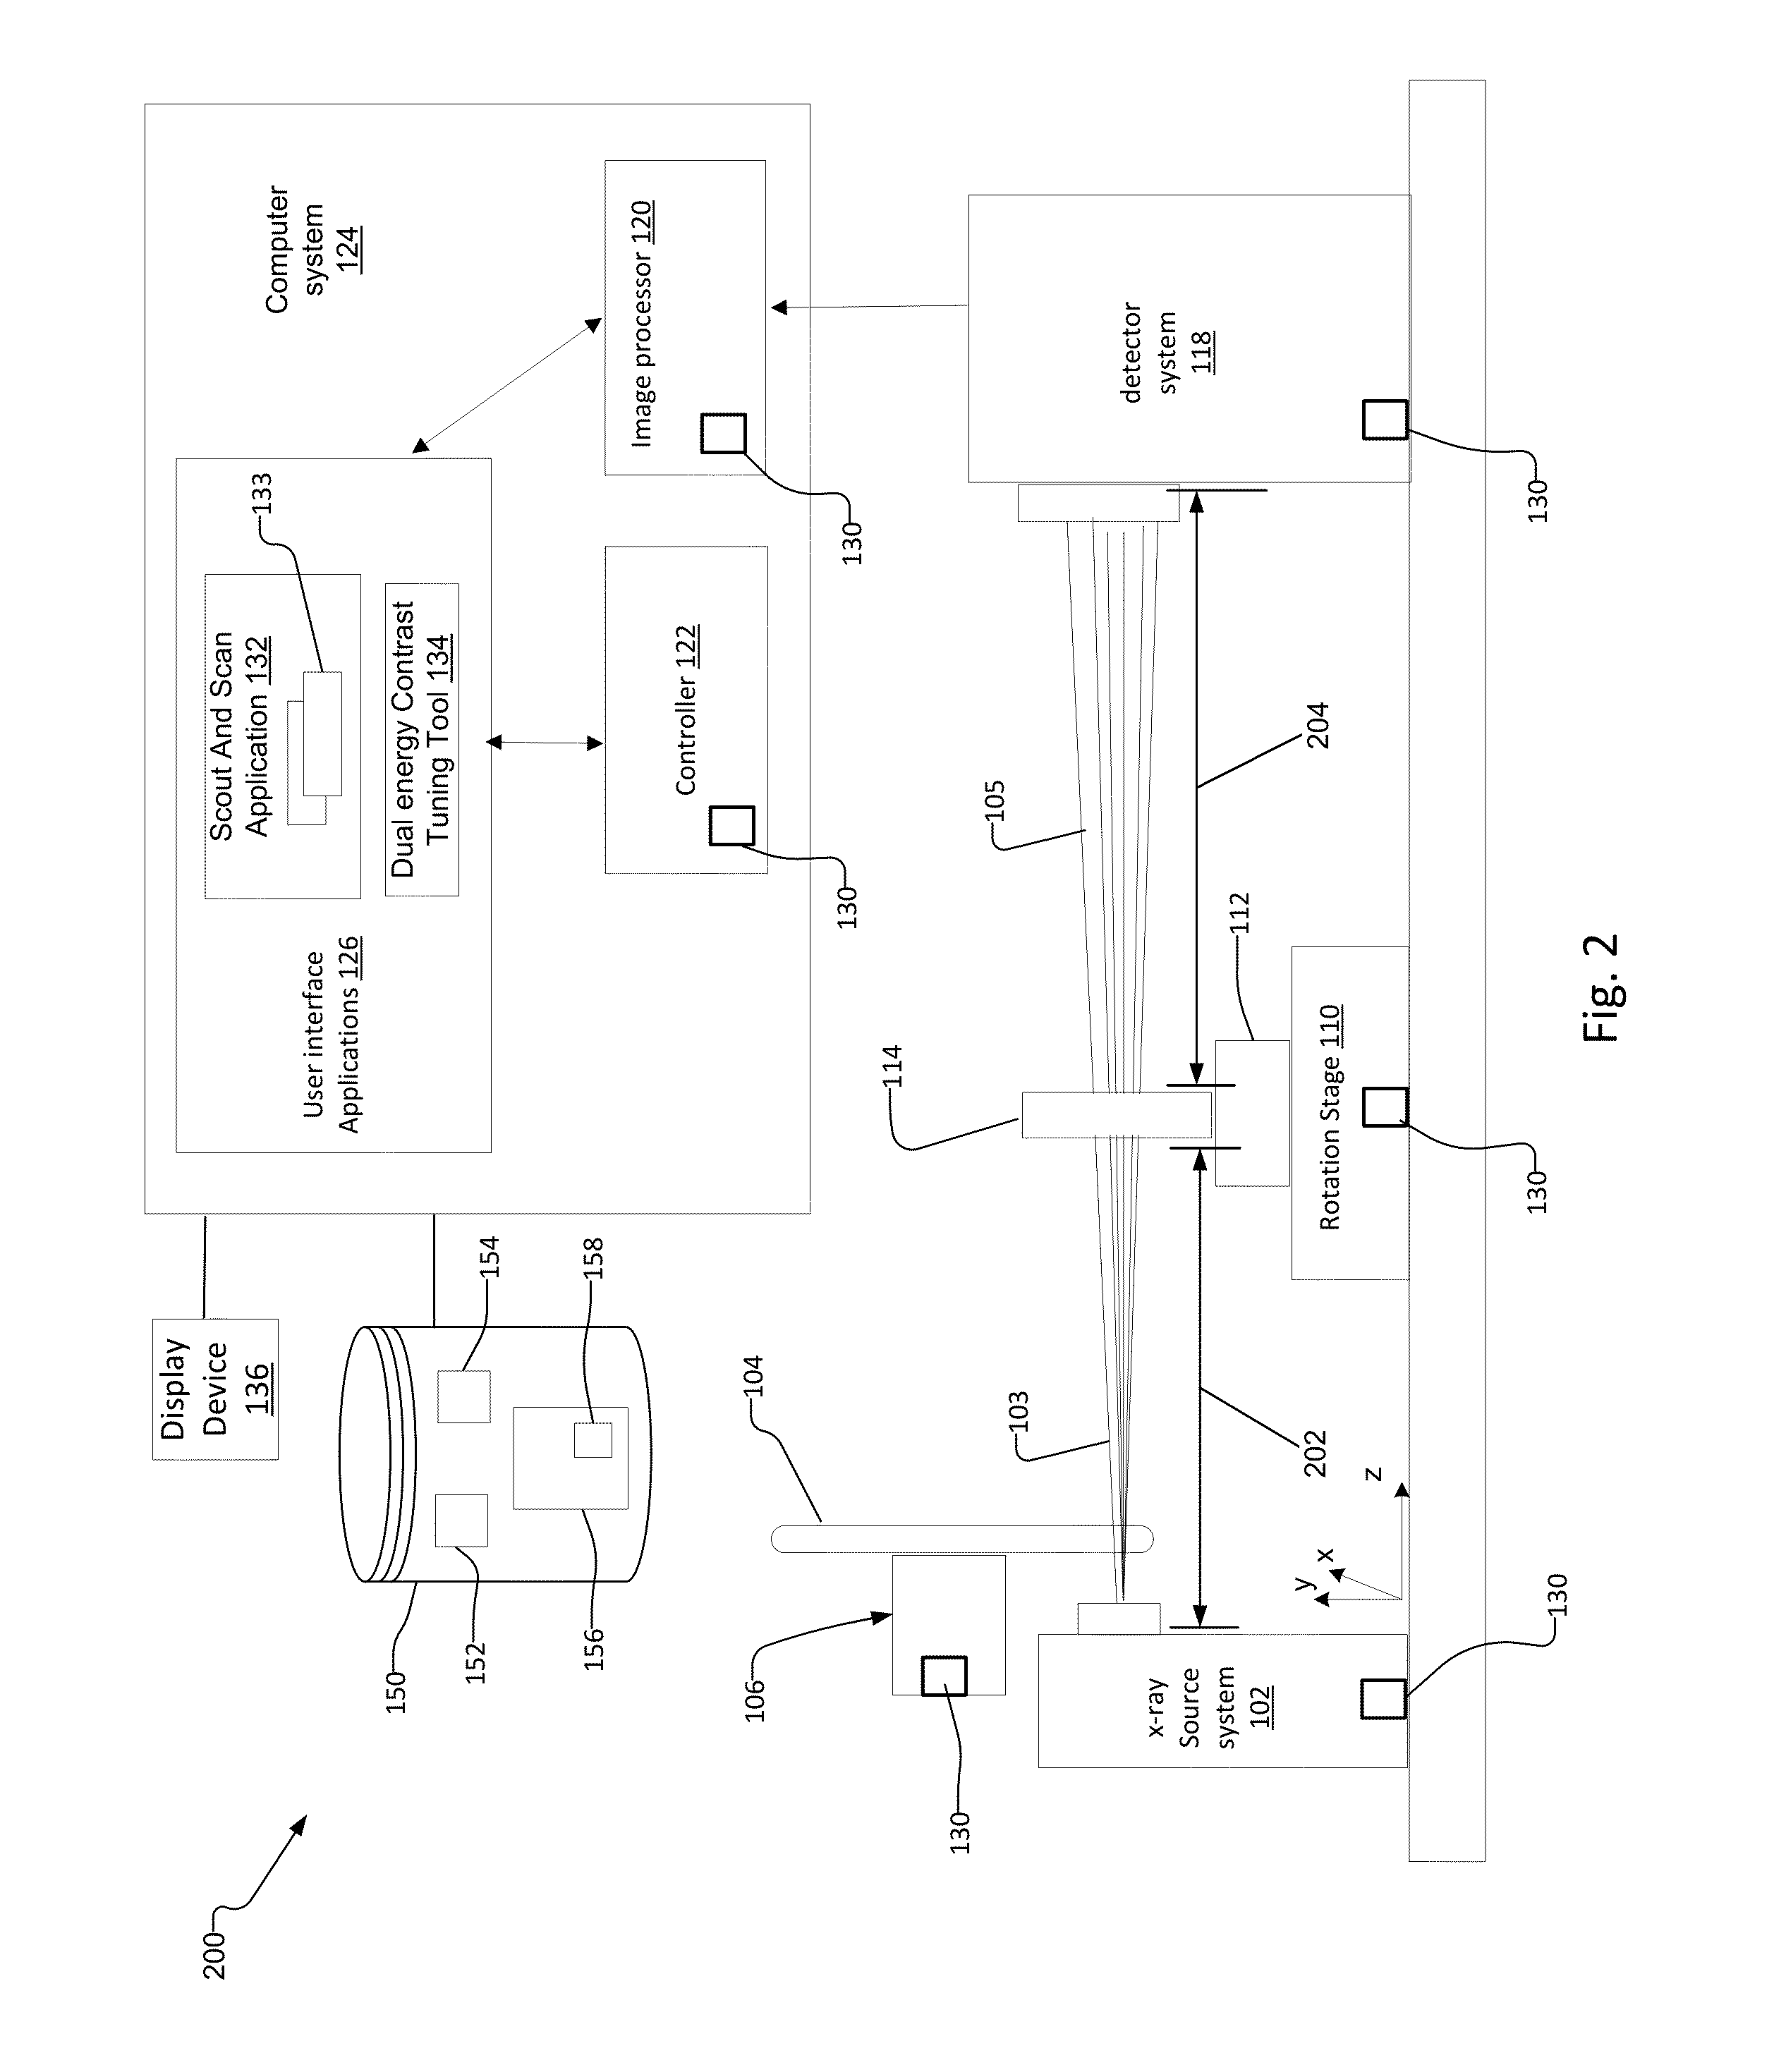 Multi Energy X-Ray Microscope Data Acquisition and Image Reconstruction System and Method